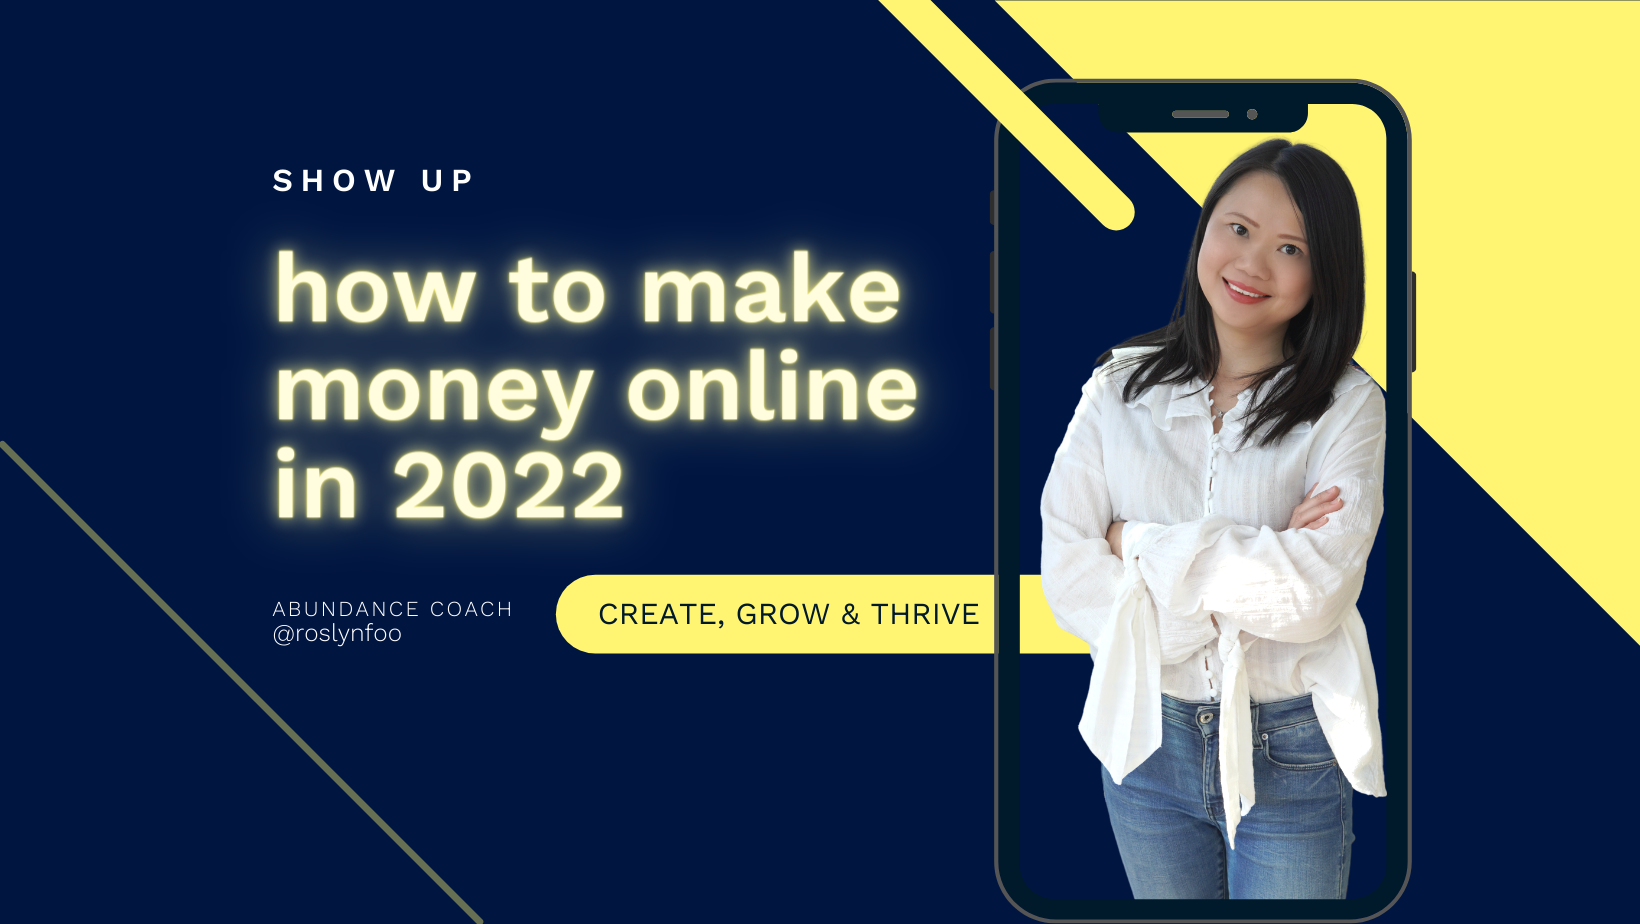 Show Up - How To Make Money Online in 2022 by Roslyn Foo